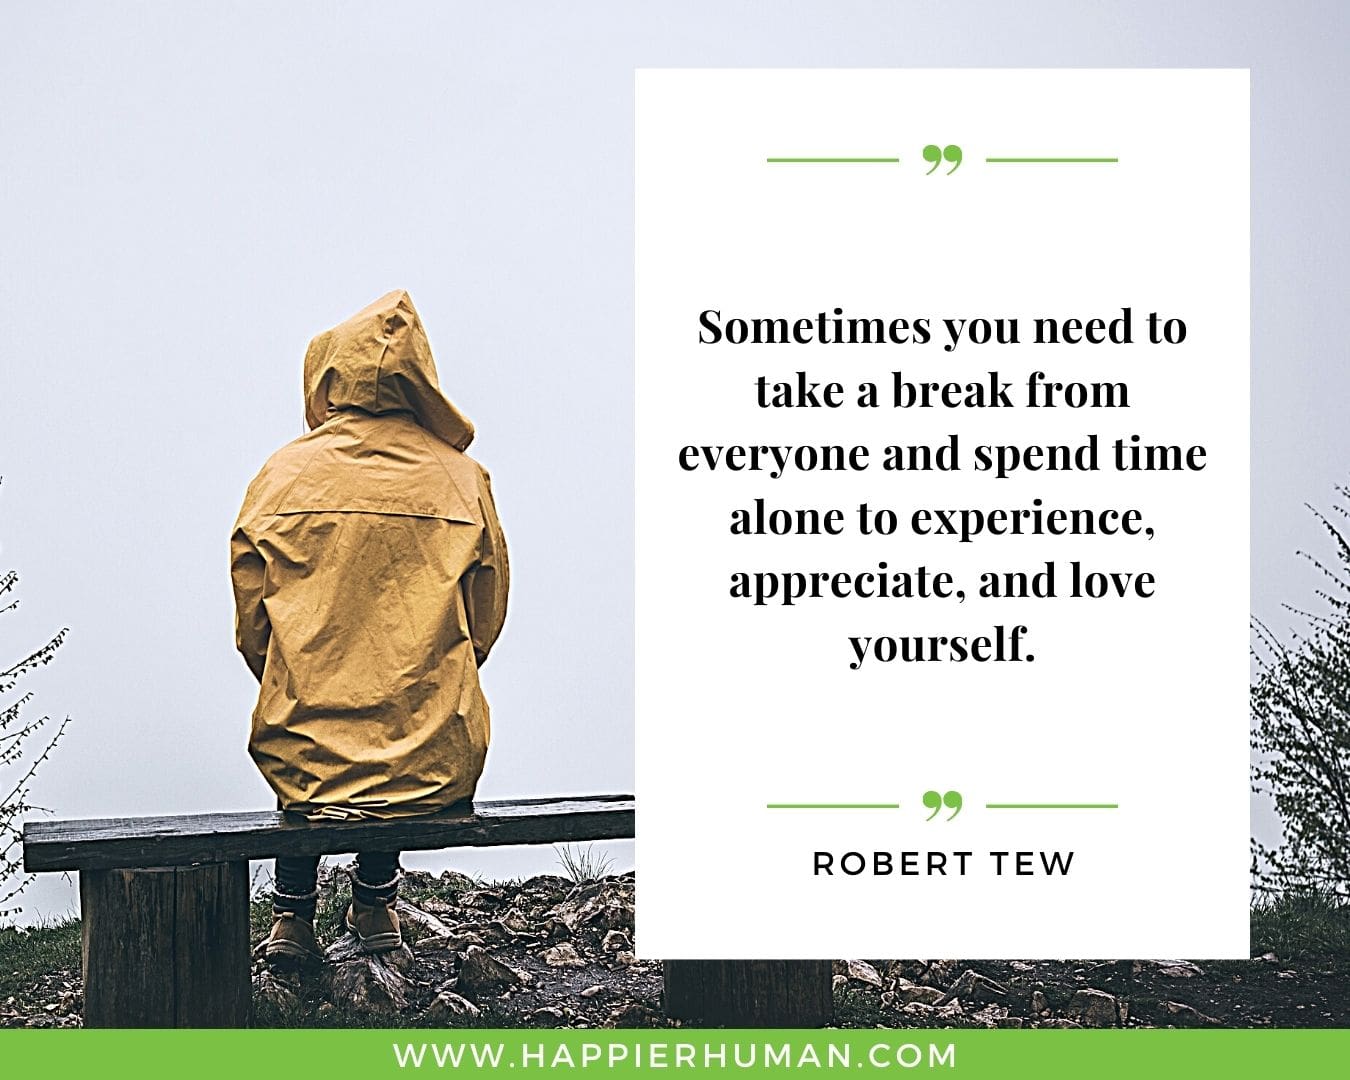 Loneliness Quotes - “Sometimes you need to take a break from everyone and spend time alone to experience, appreciate, and love yourself.” – Robert Tew